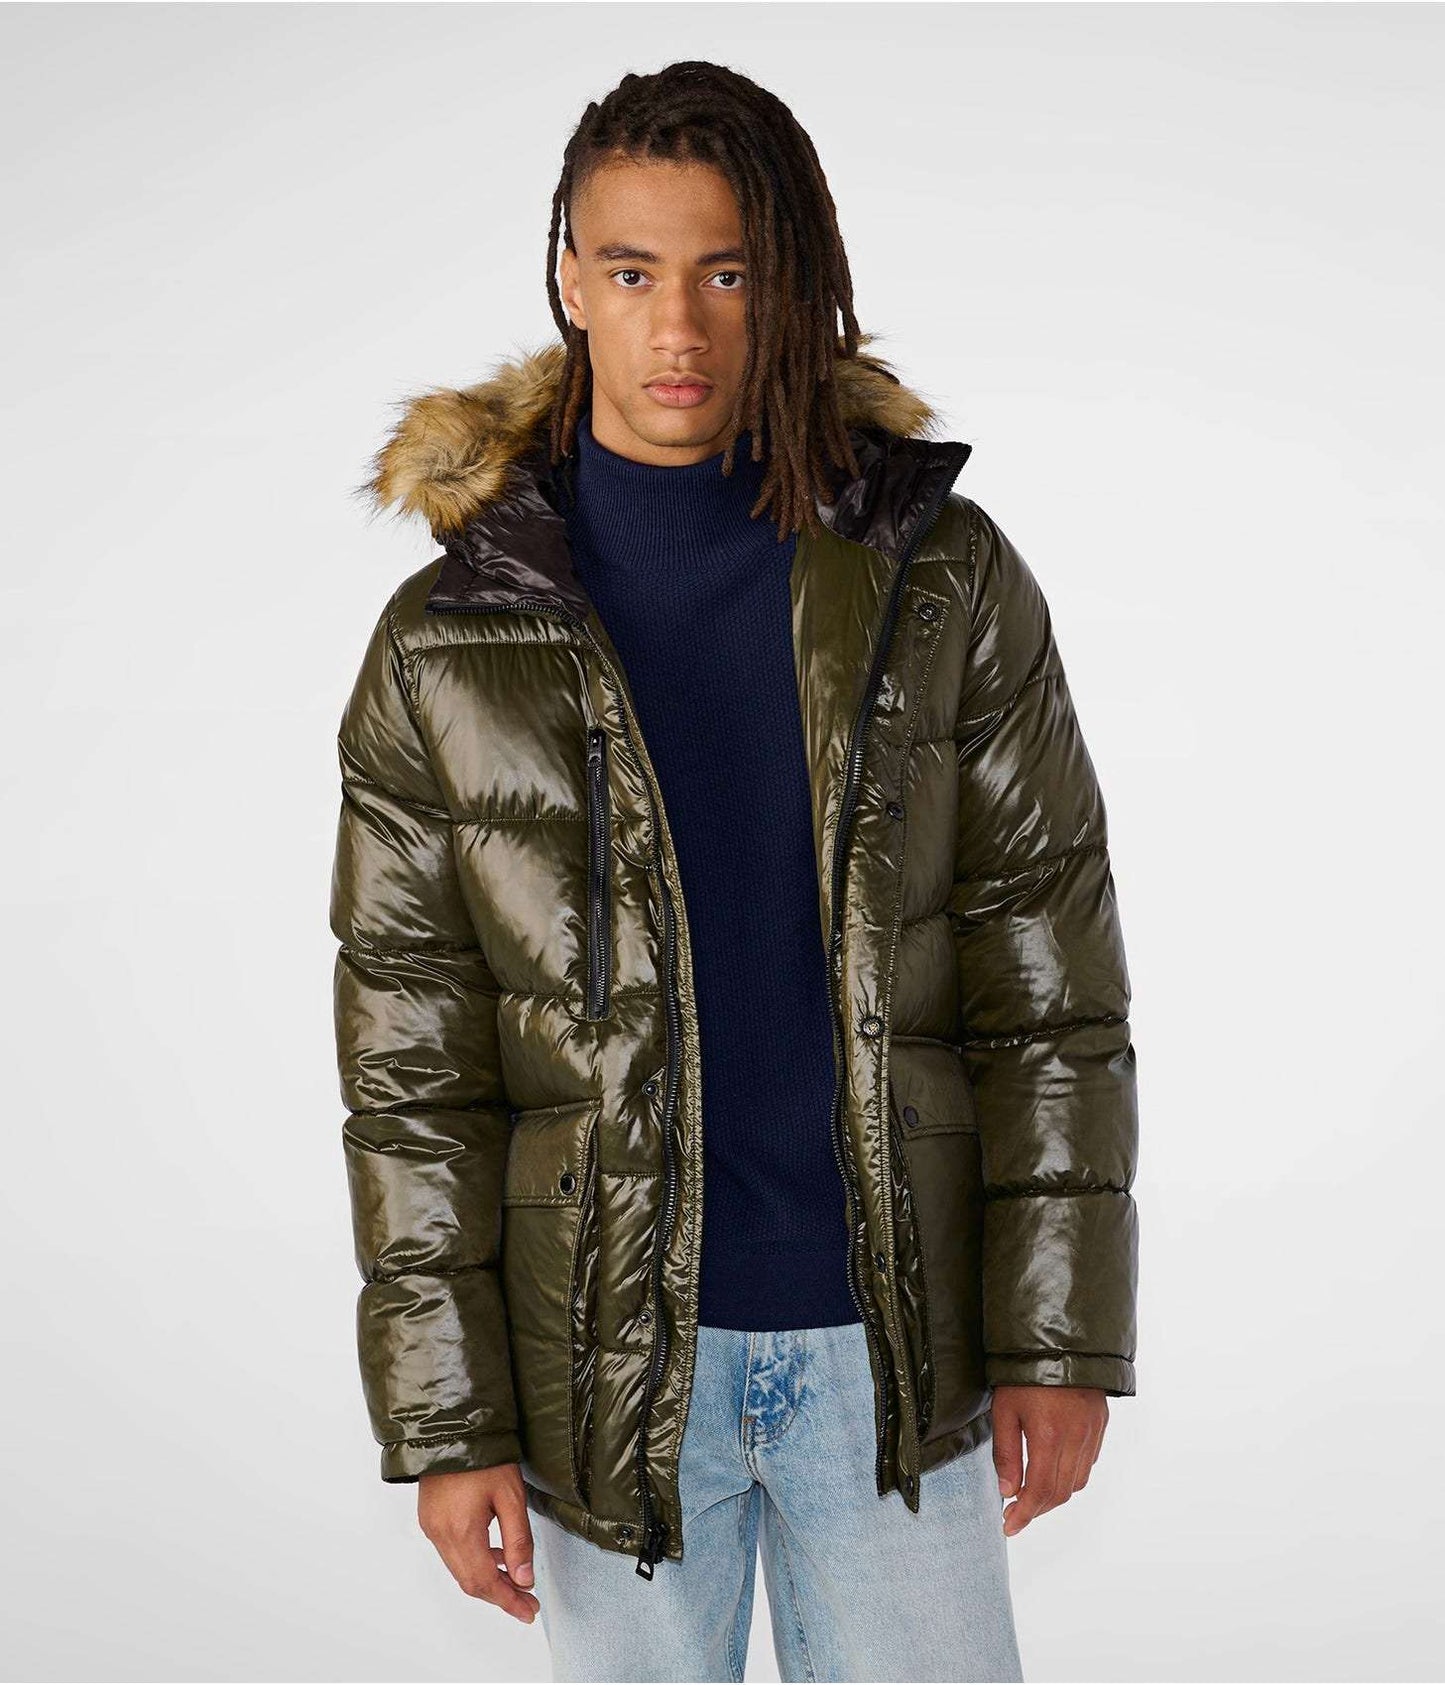 Men's Leather Puffer Jacket in Green With Fur Hood